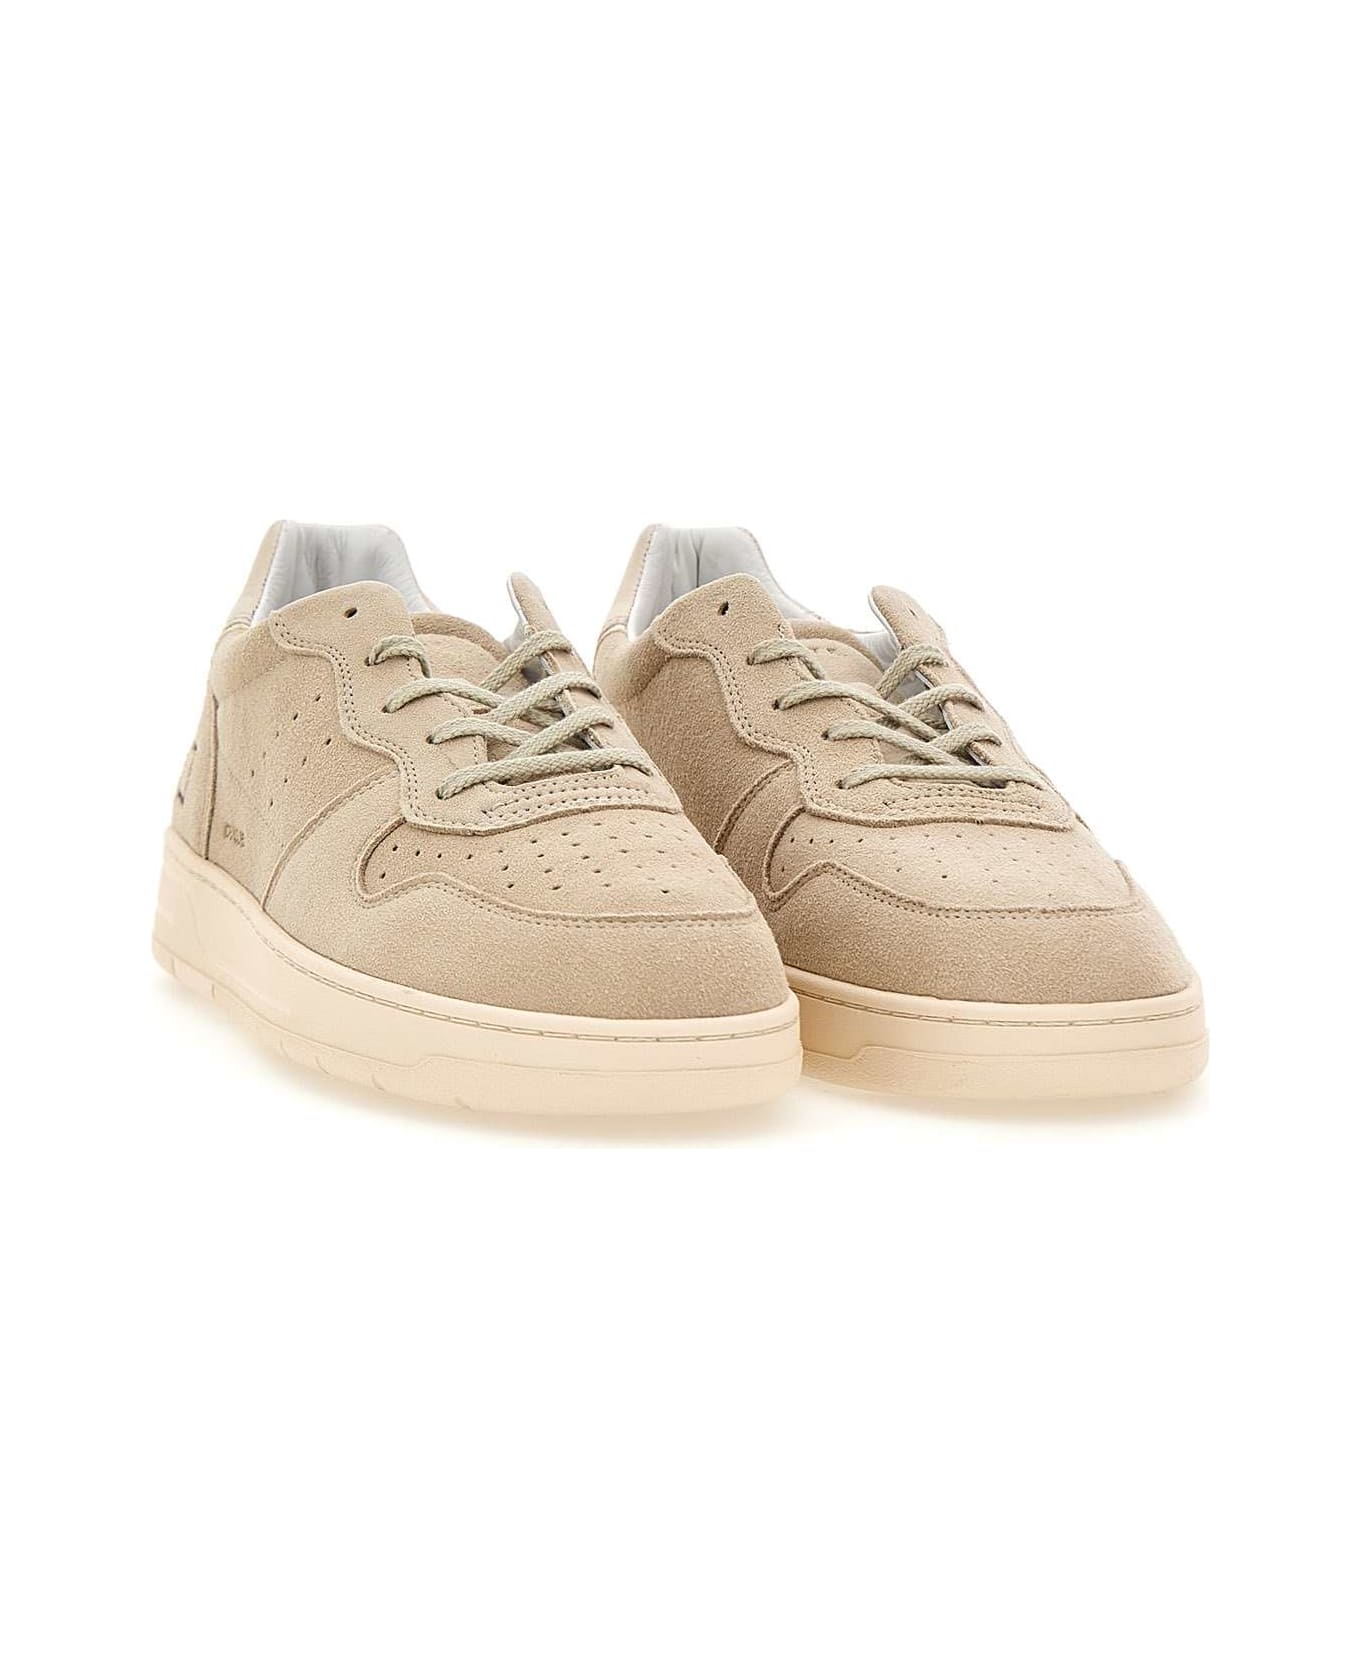 D.A.T.E. "court 2.0 Colored" Suede Sneakers - BEIGE スニーカー